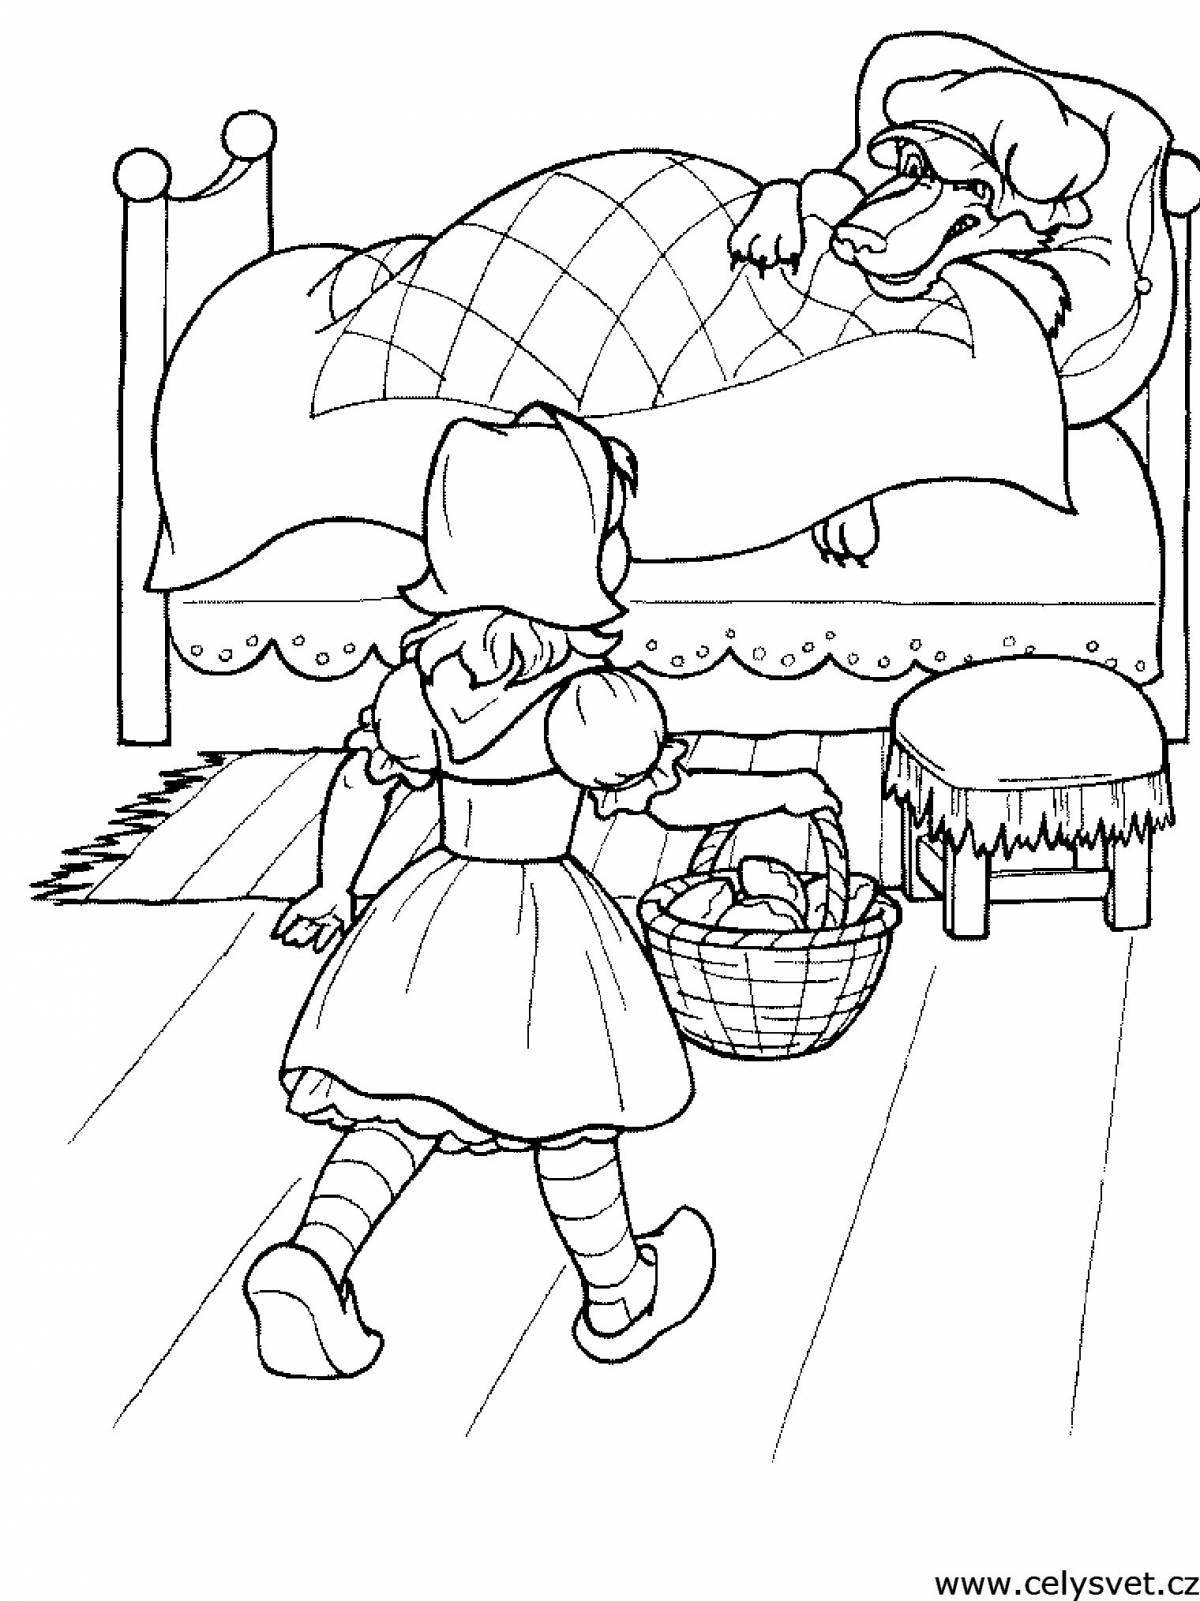 Coloring book glowing little red riding hood